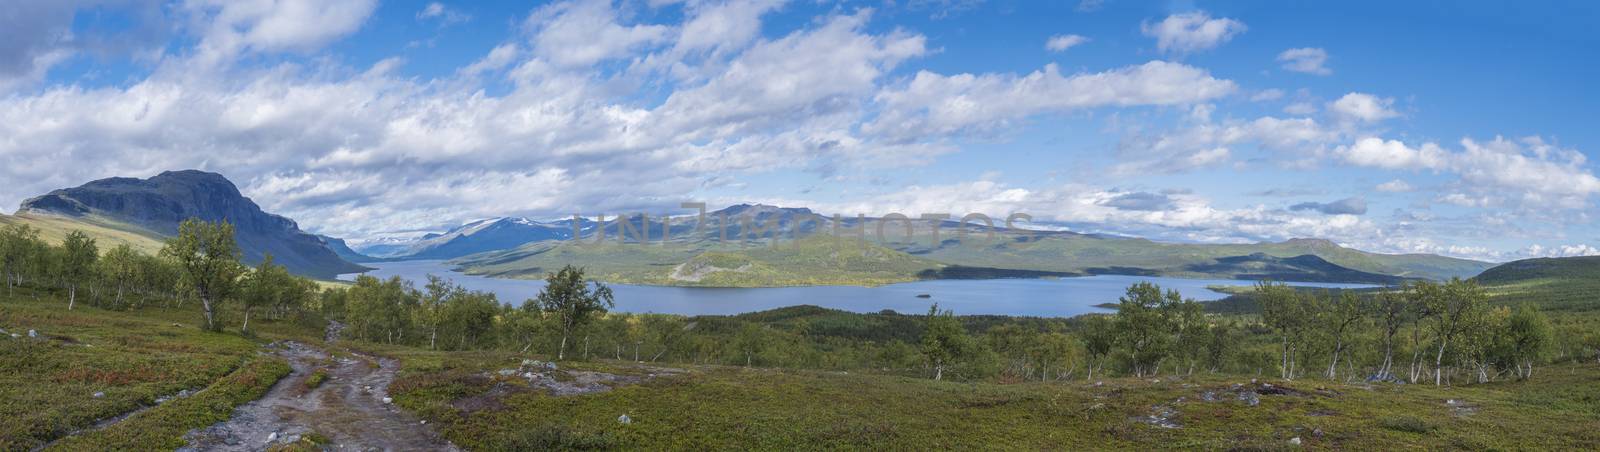 Panoramic landscape with beautiful river Lulealven, snow capped mountain, birch tree and footpath of Kungsleden hiking trail near Saltoluokta, north of Sweden, Lapland wild nature. Summer blue sky.